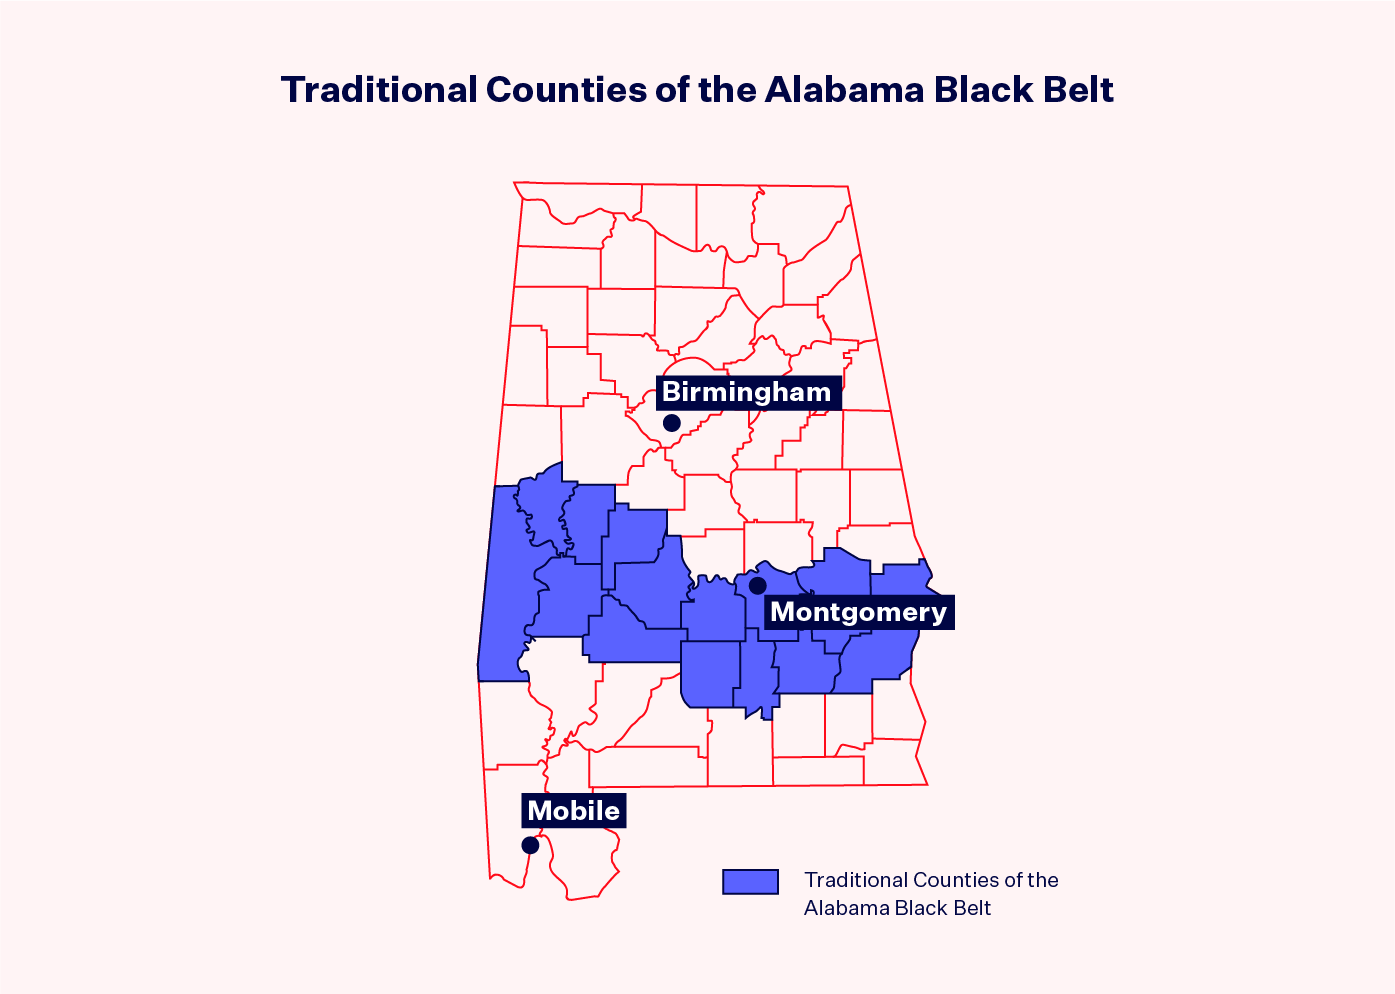 Map of the traditional counties of the Alabama Black Belt. The map of Alabama contains a stretch of counties from the west of the state to the east of the state colored in blue. The blue-shaded counties are in the 2nd quadrant from the bottom of the state.